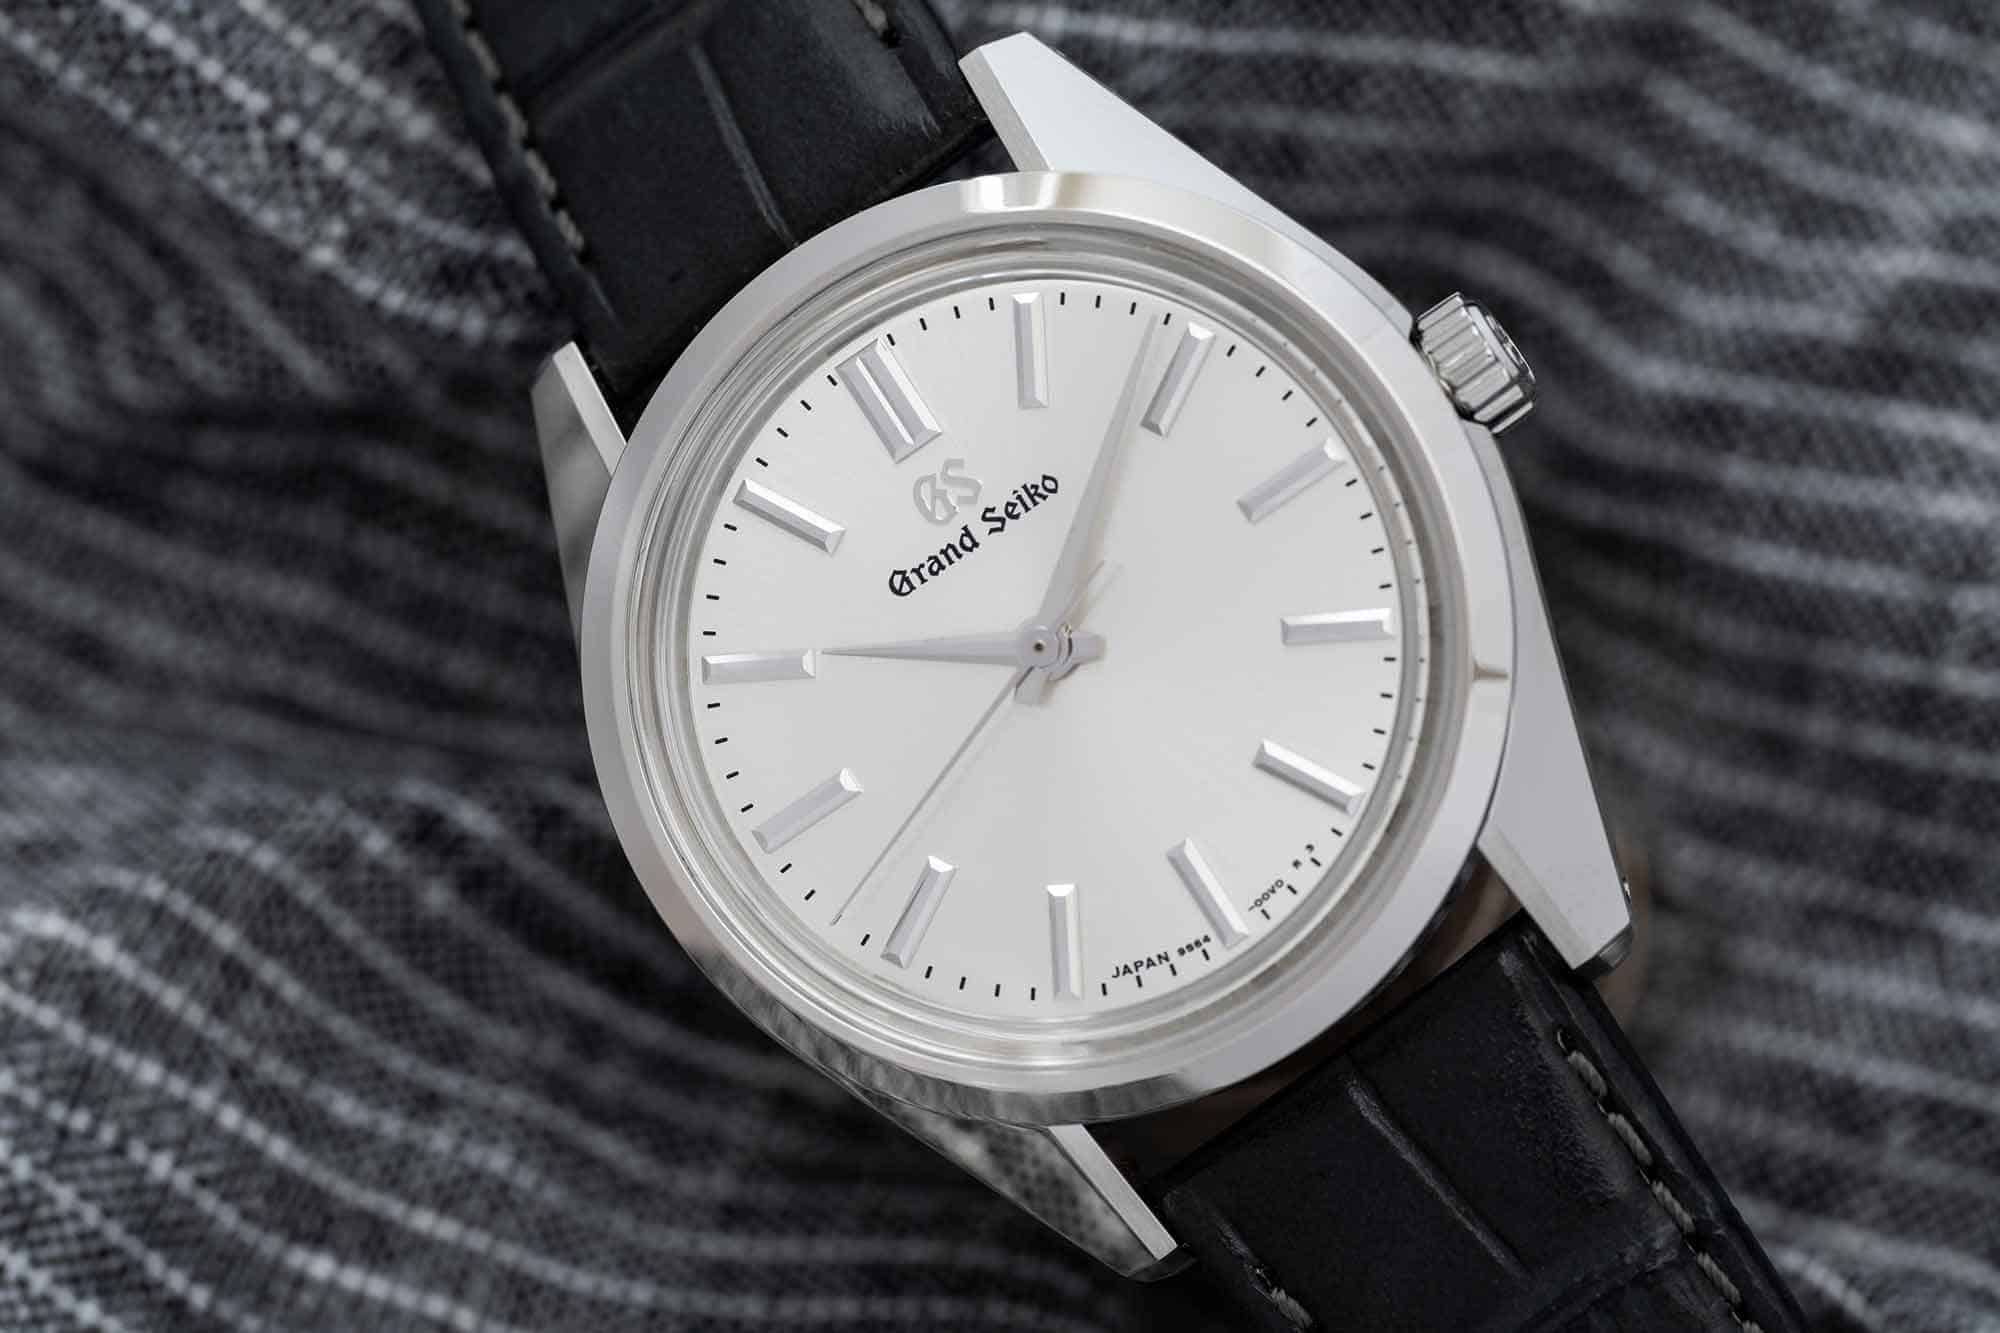 Grand Seiko Expands their Midsize Offerings with Two New Watches in a Smaller 44GS Case